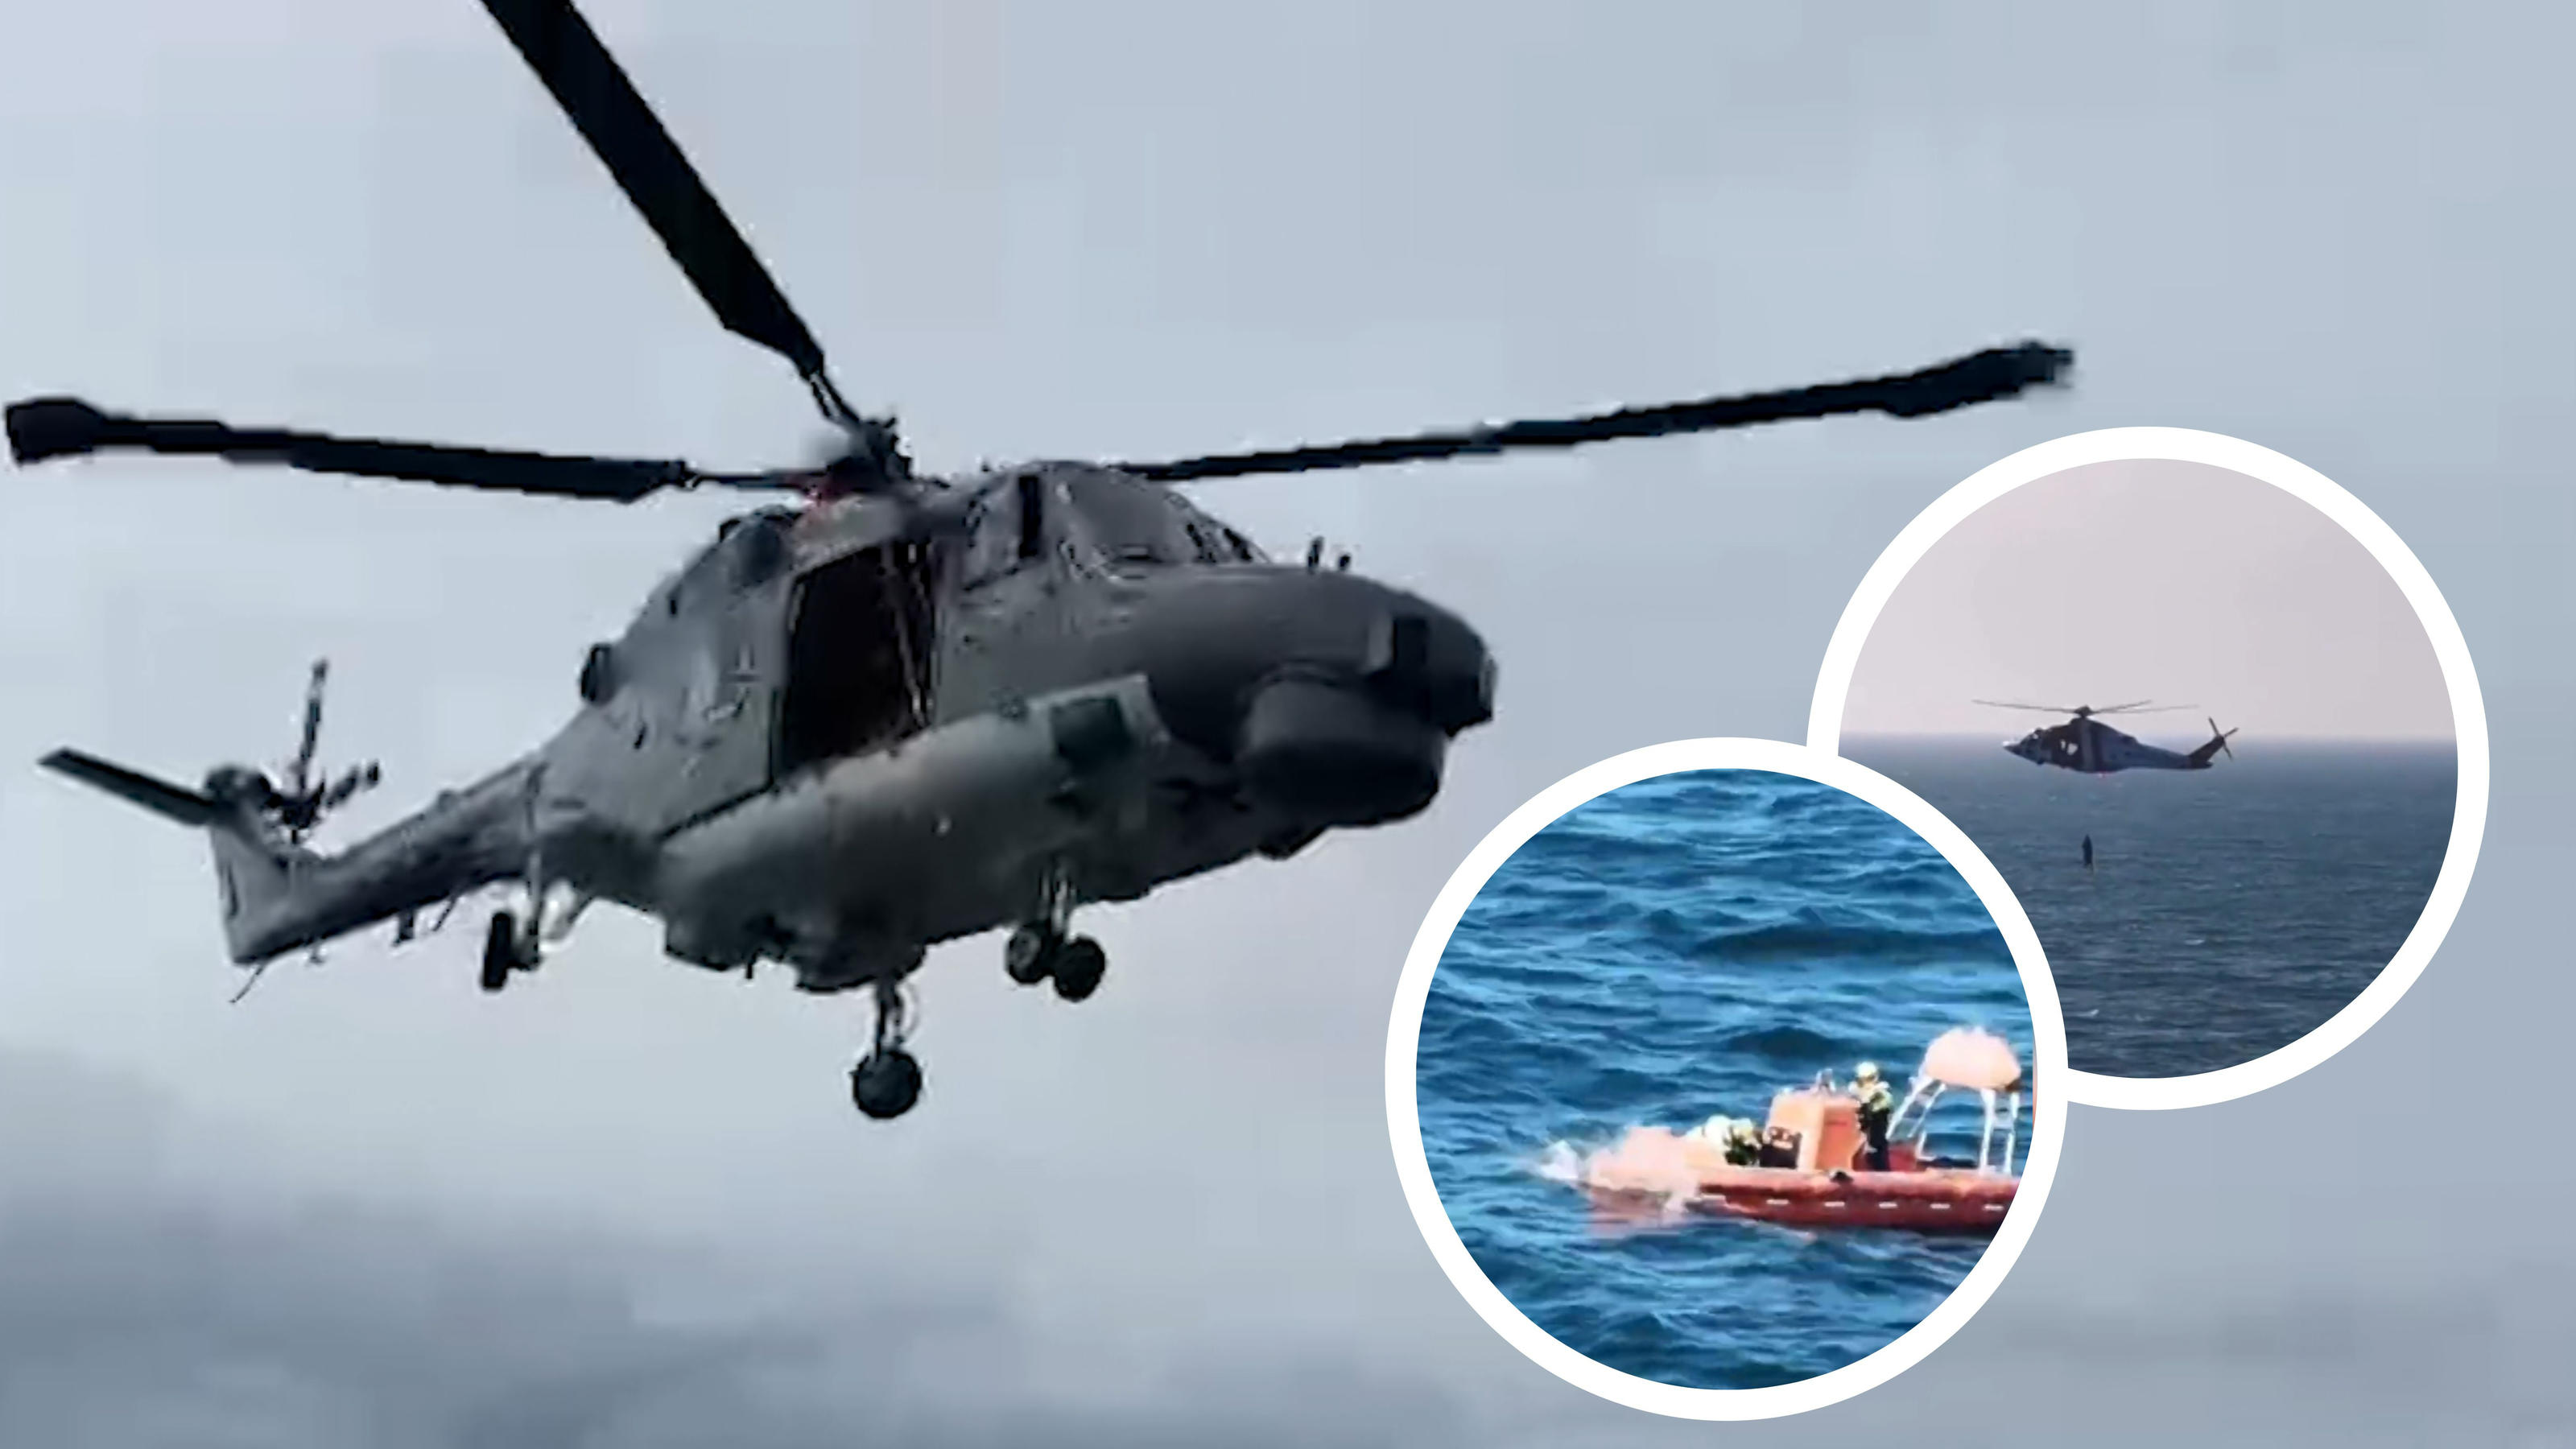 Mother (36) and son (7) die after falling from boat after Baltic Sea rescue operation